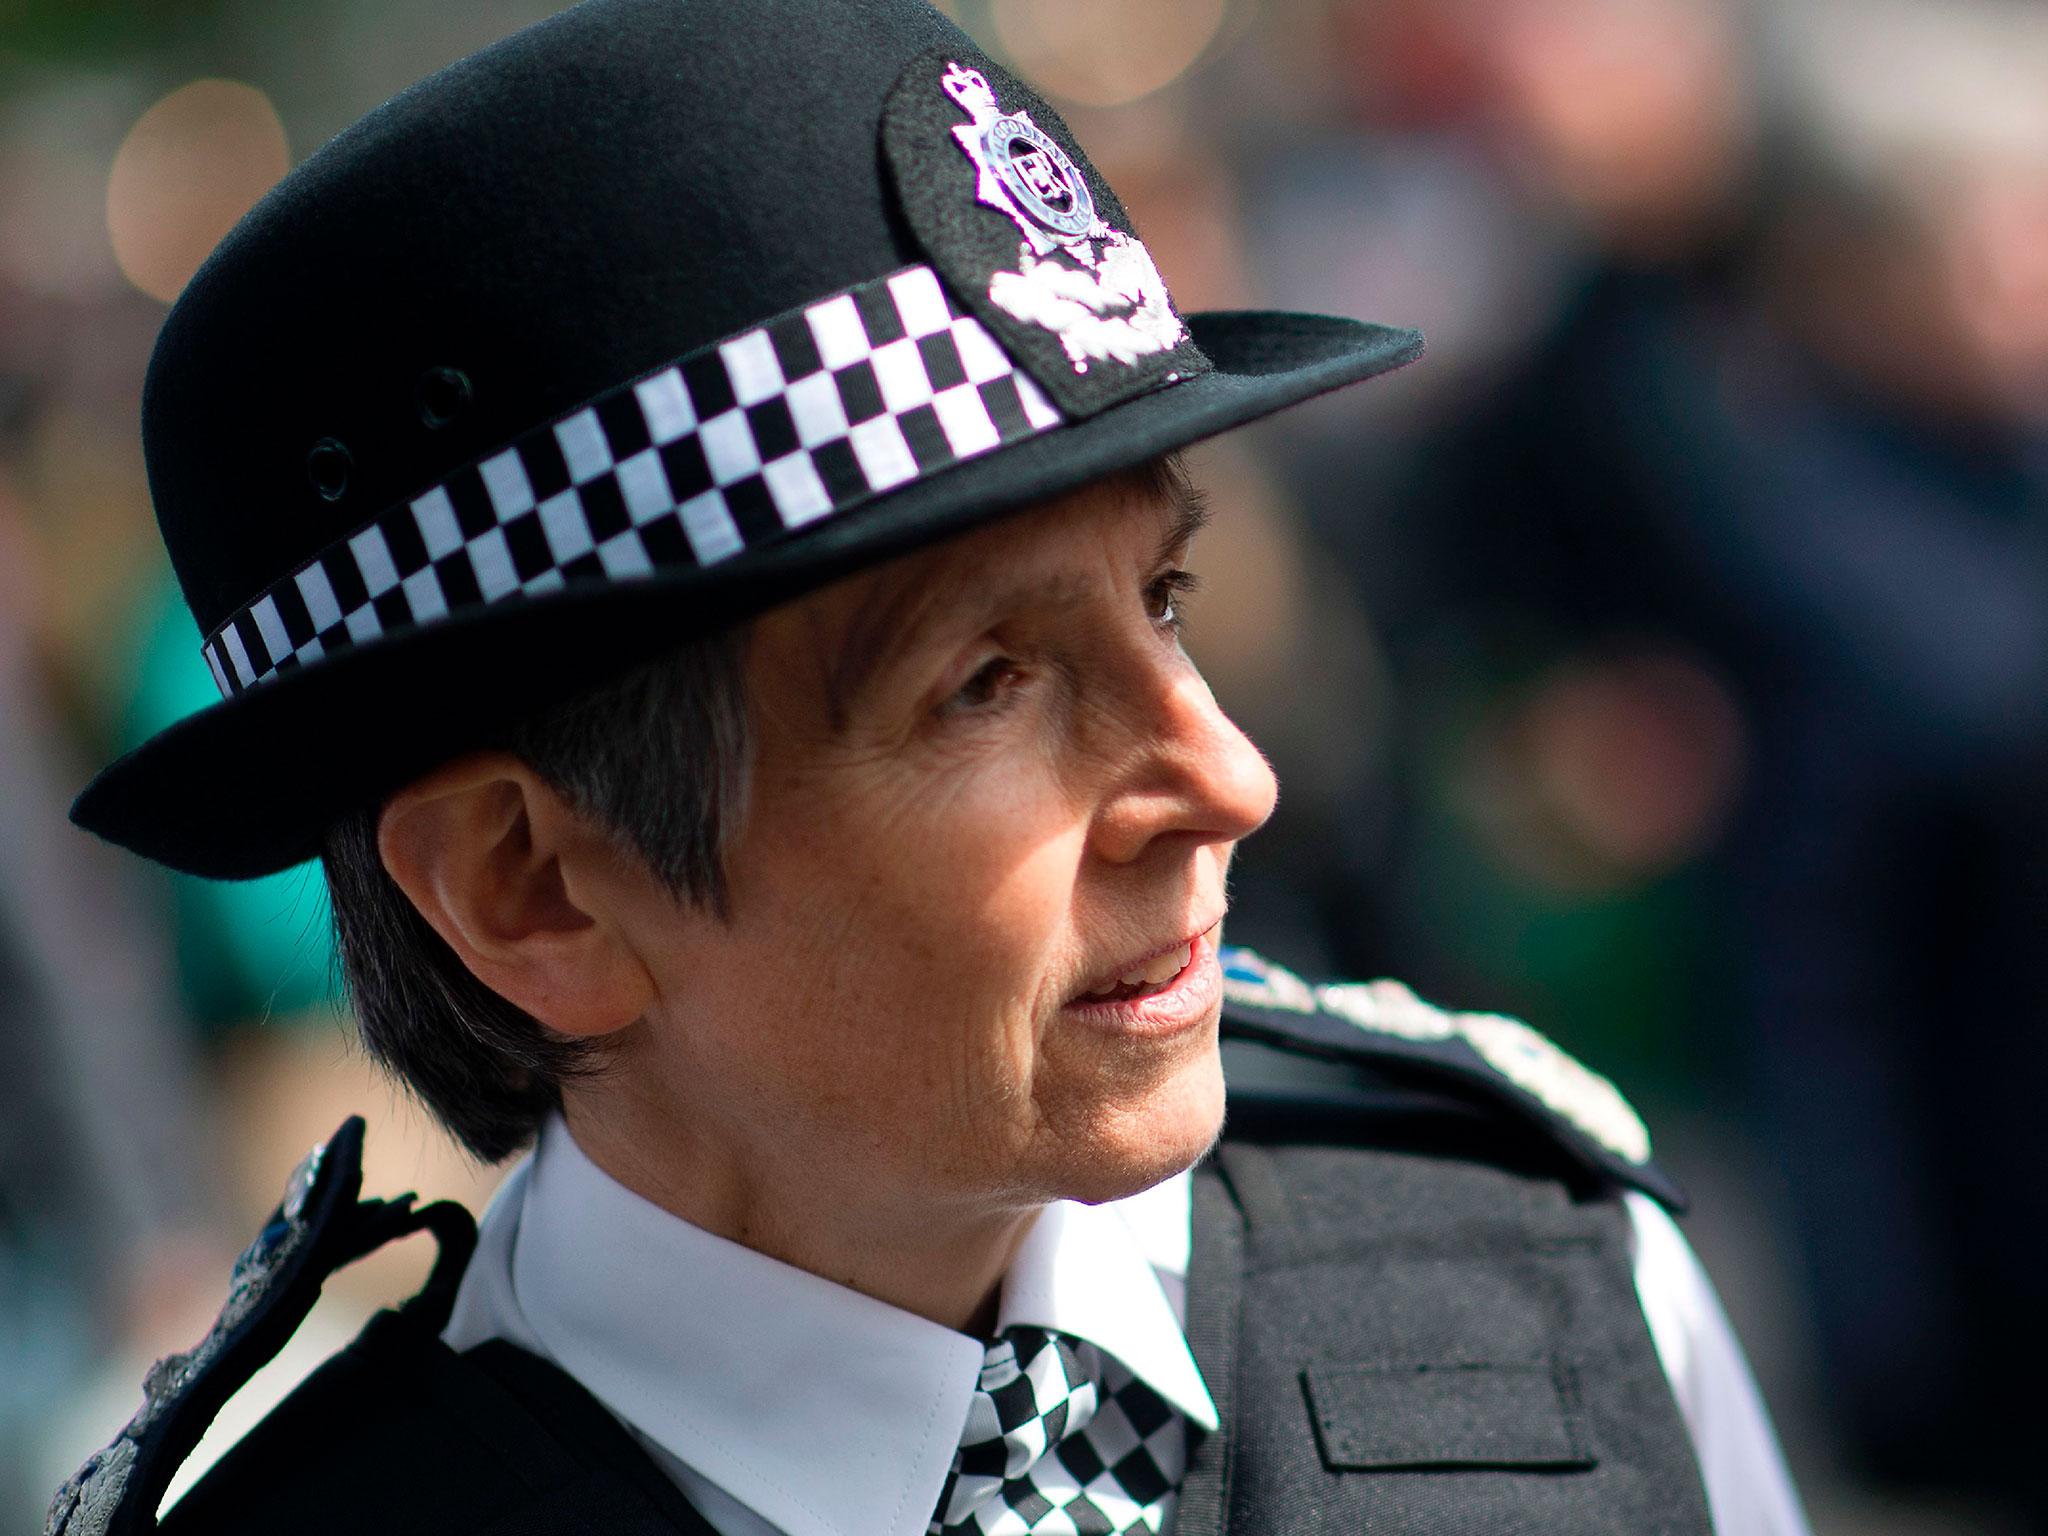 &#13;
The policy was unveiled weeks after Commissioner Cressida Dick warned that terrorism was putting 'unsustaintable' strain on her force &#13;